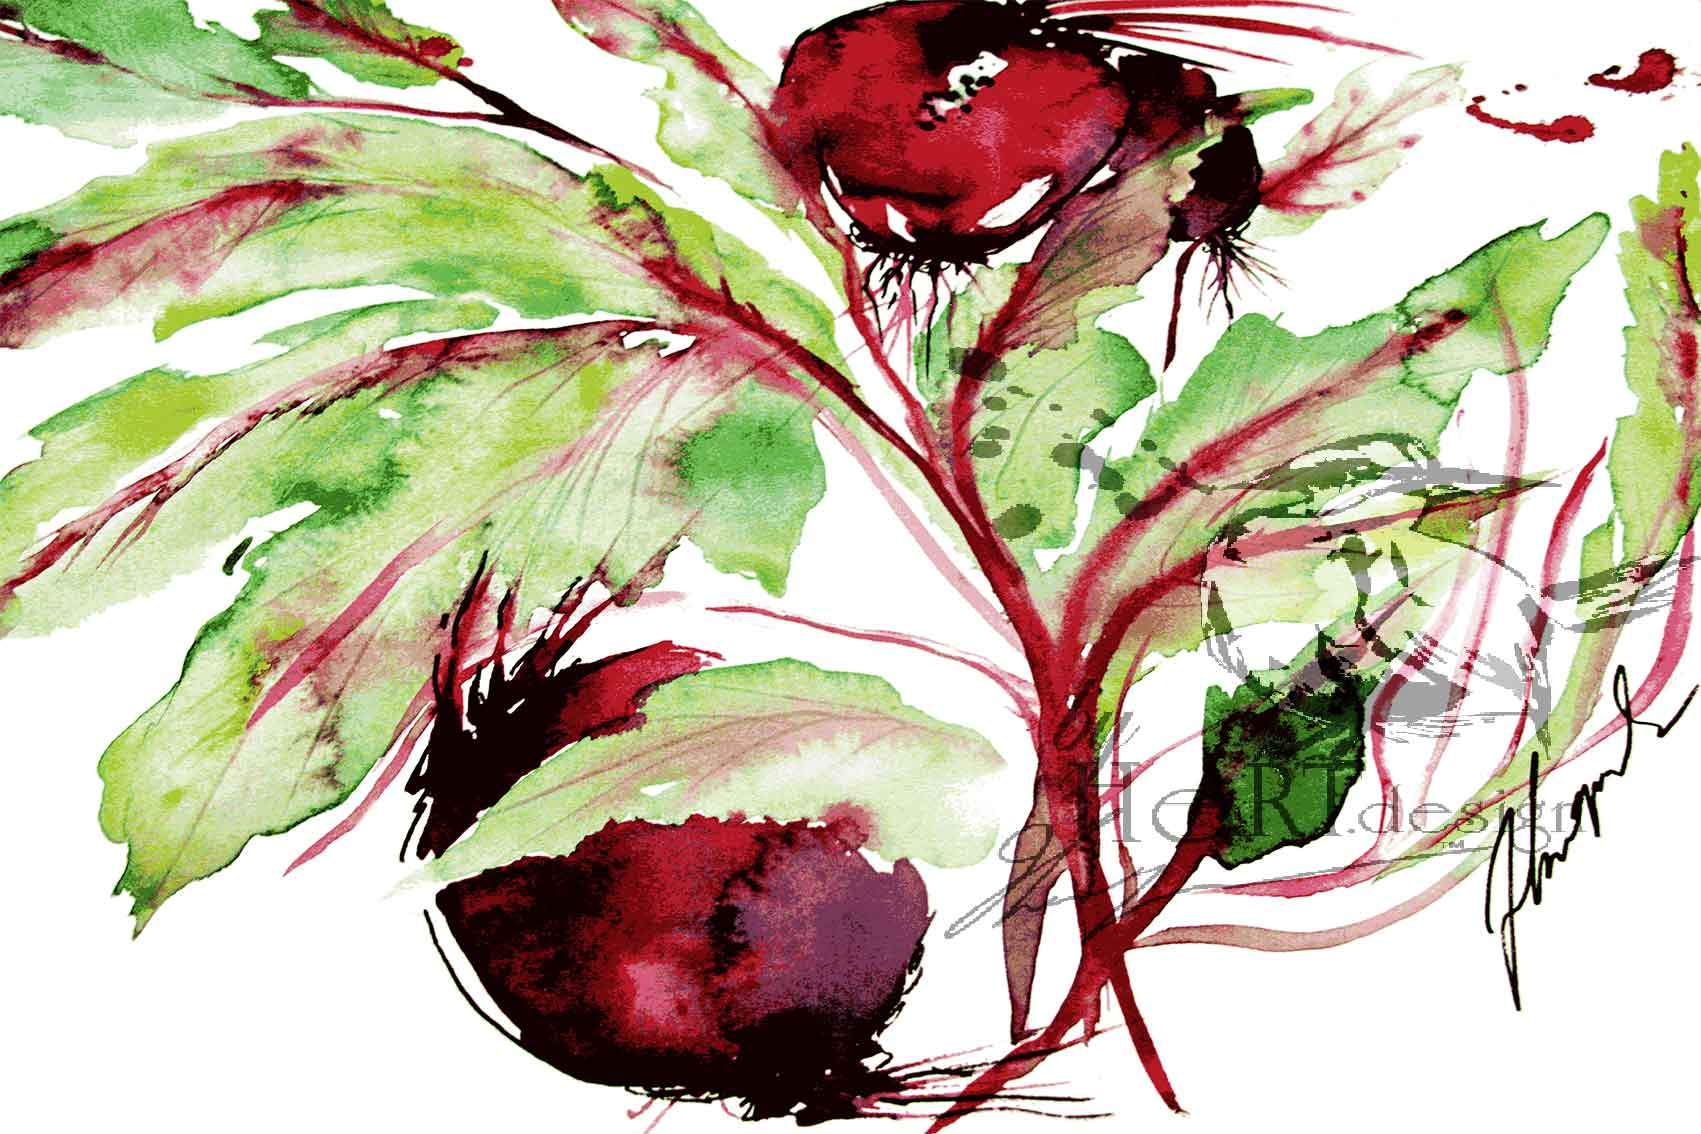 ART FRUITS, THE RED BEET